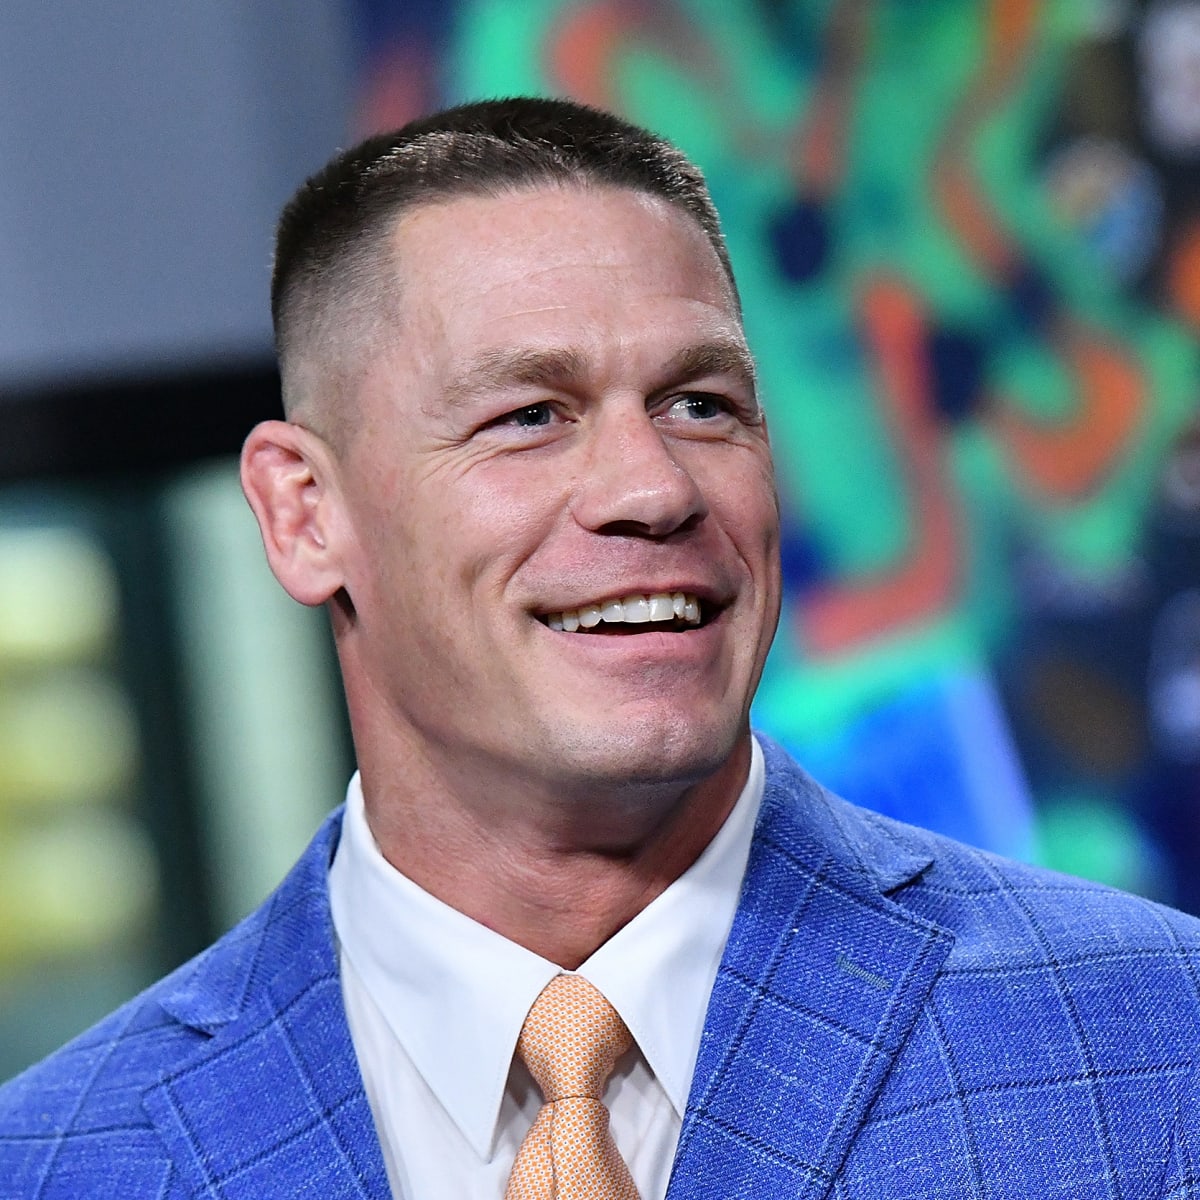 After Receiving Dancing Lessons From Hugh Jackman, John Cena Returned the  Favor by Making Him a Showman Like Dwayne Johnson and Other WWE Stars:  You're Amazing